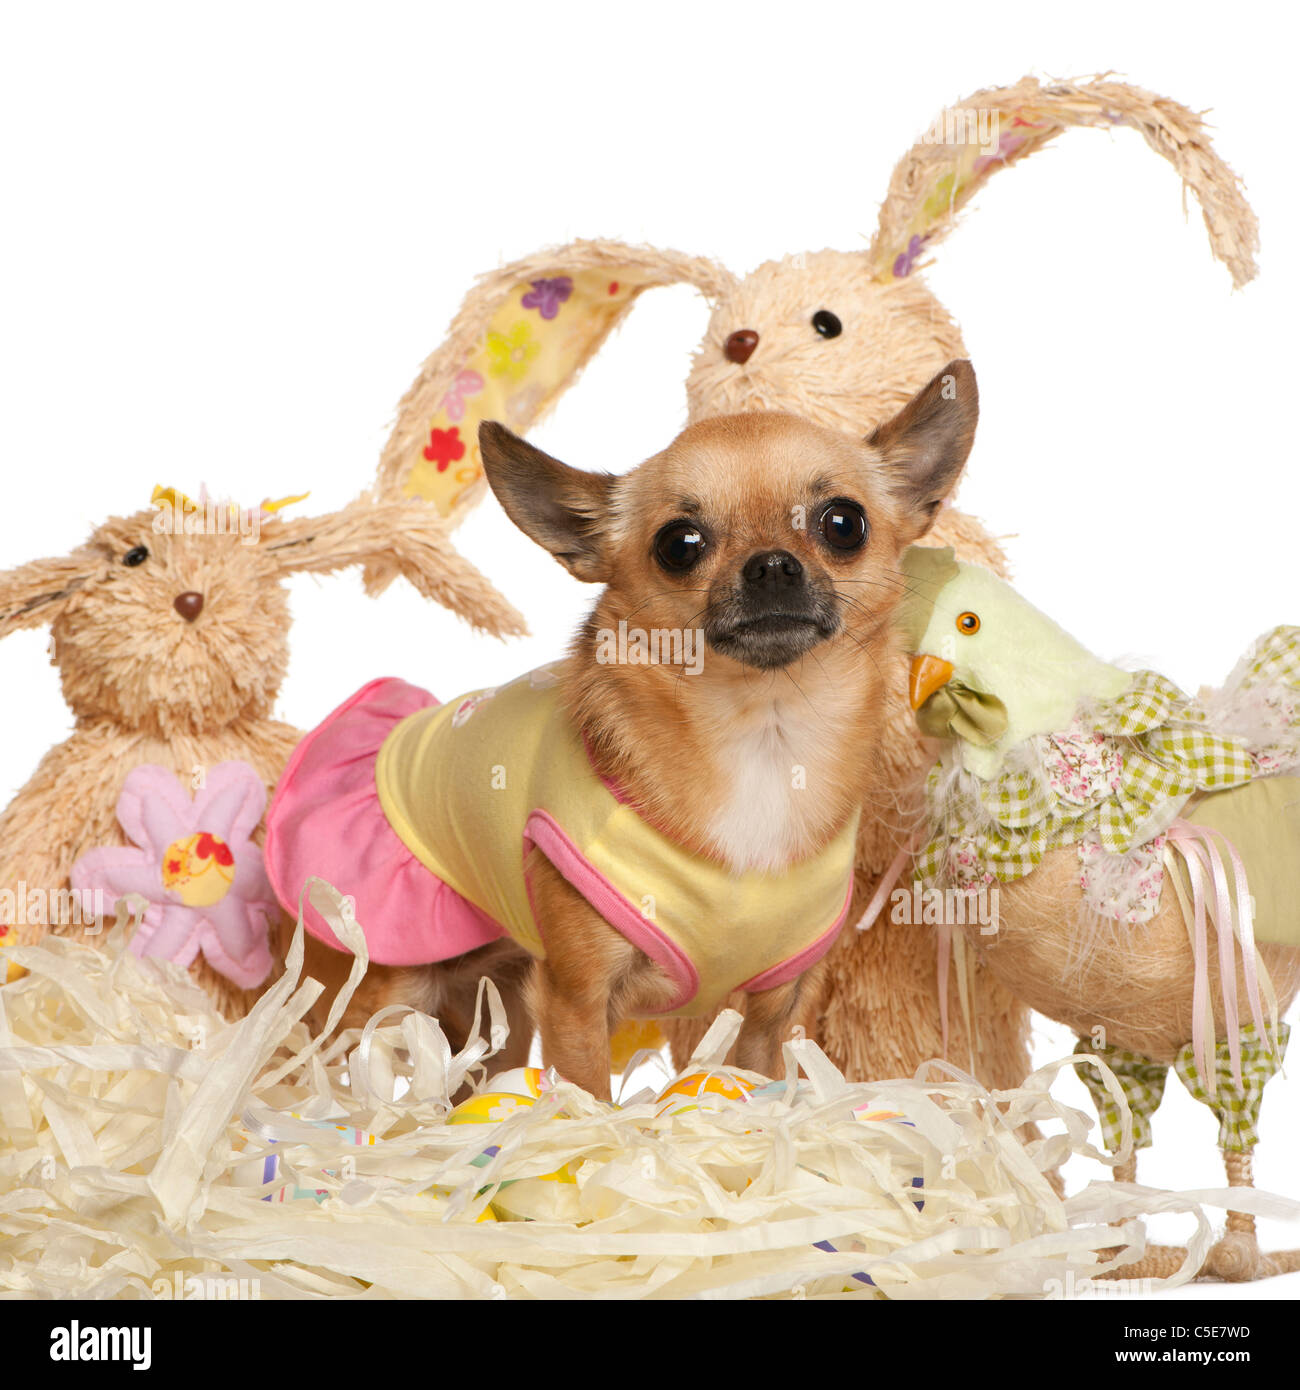 Chihuahua dressed up and standing with Easter stuffed animals in front of white background Stock Photo